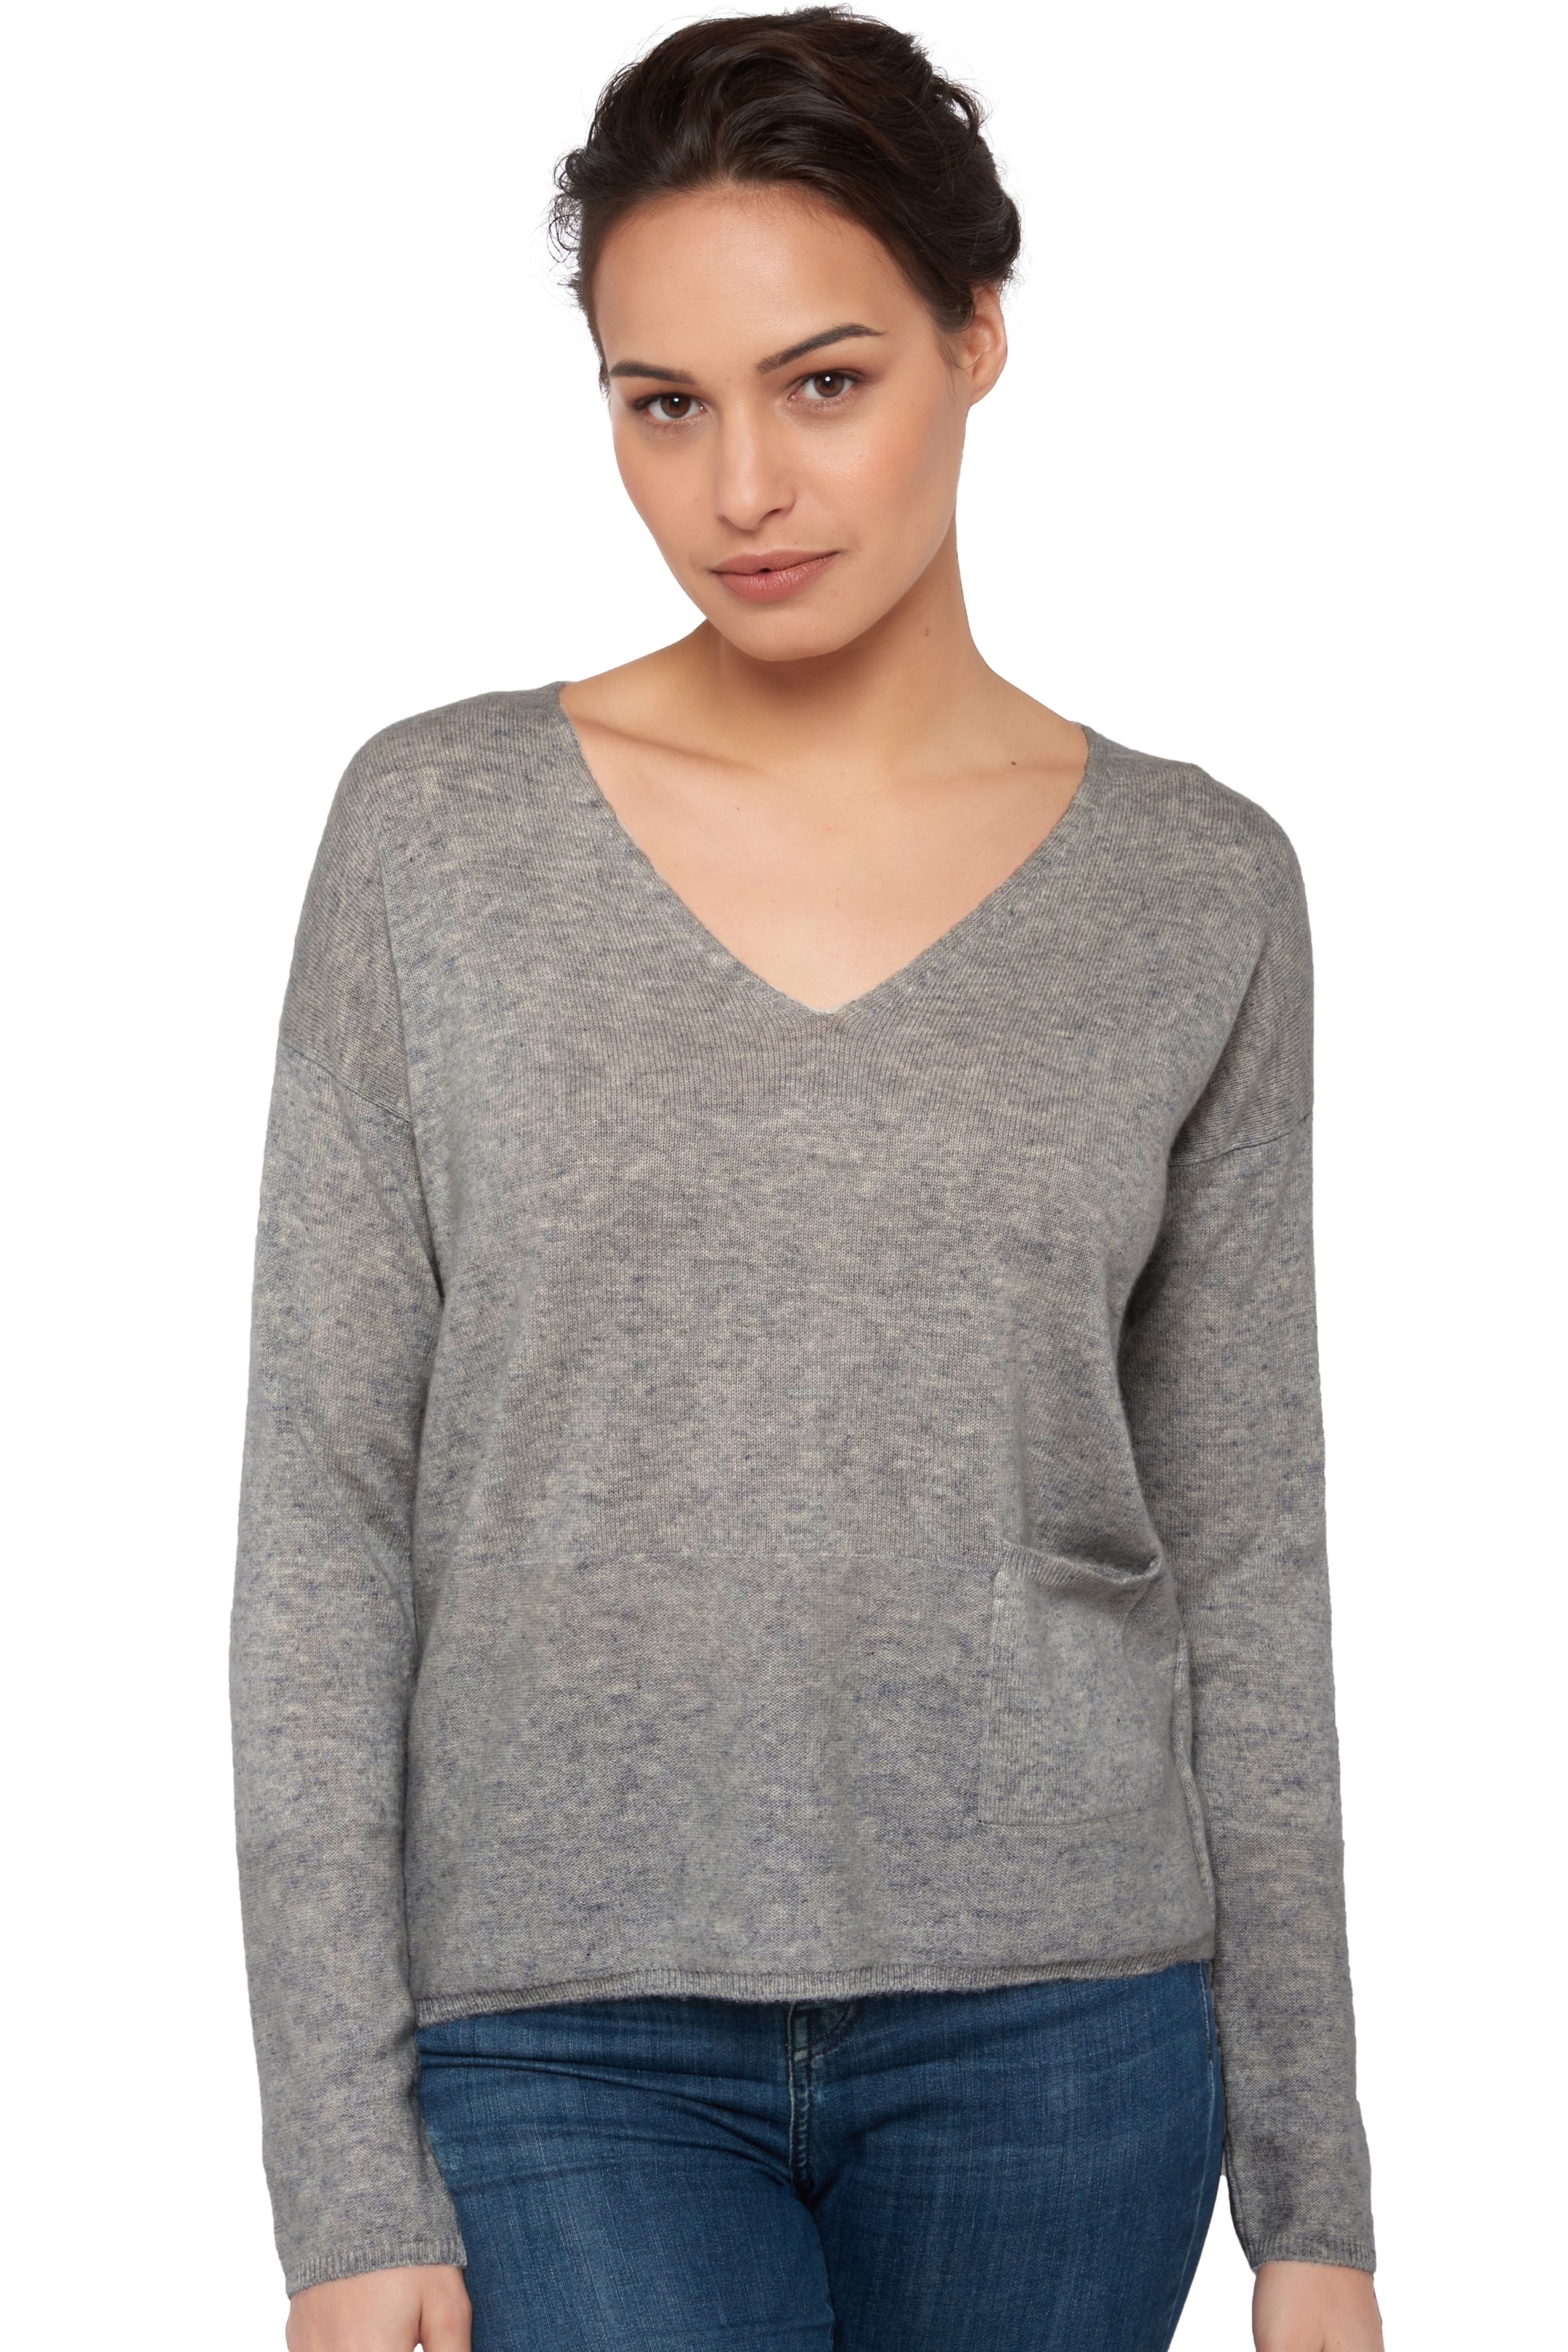 Cachemire pull femme col v uliana gris chine m